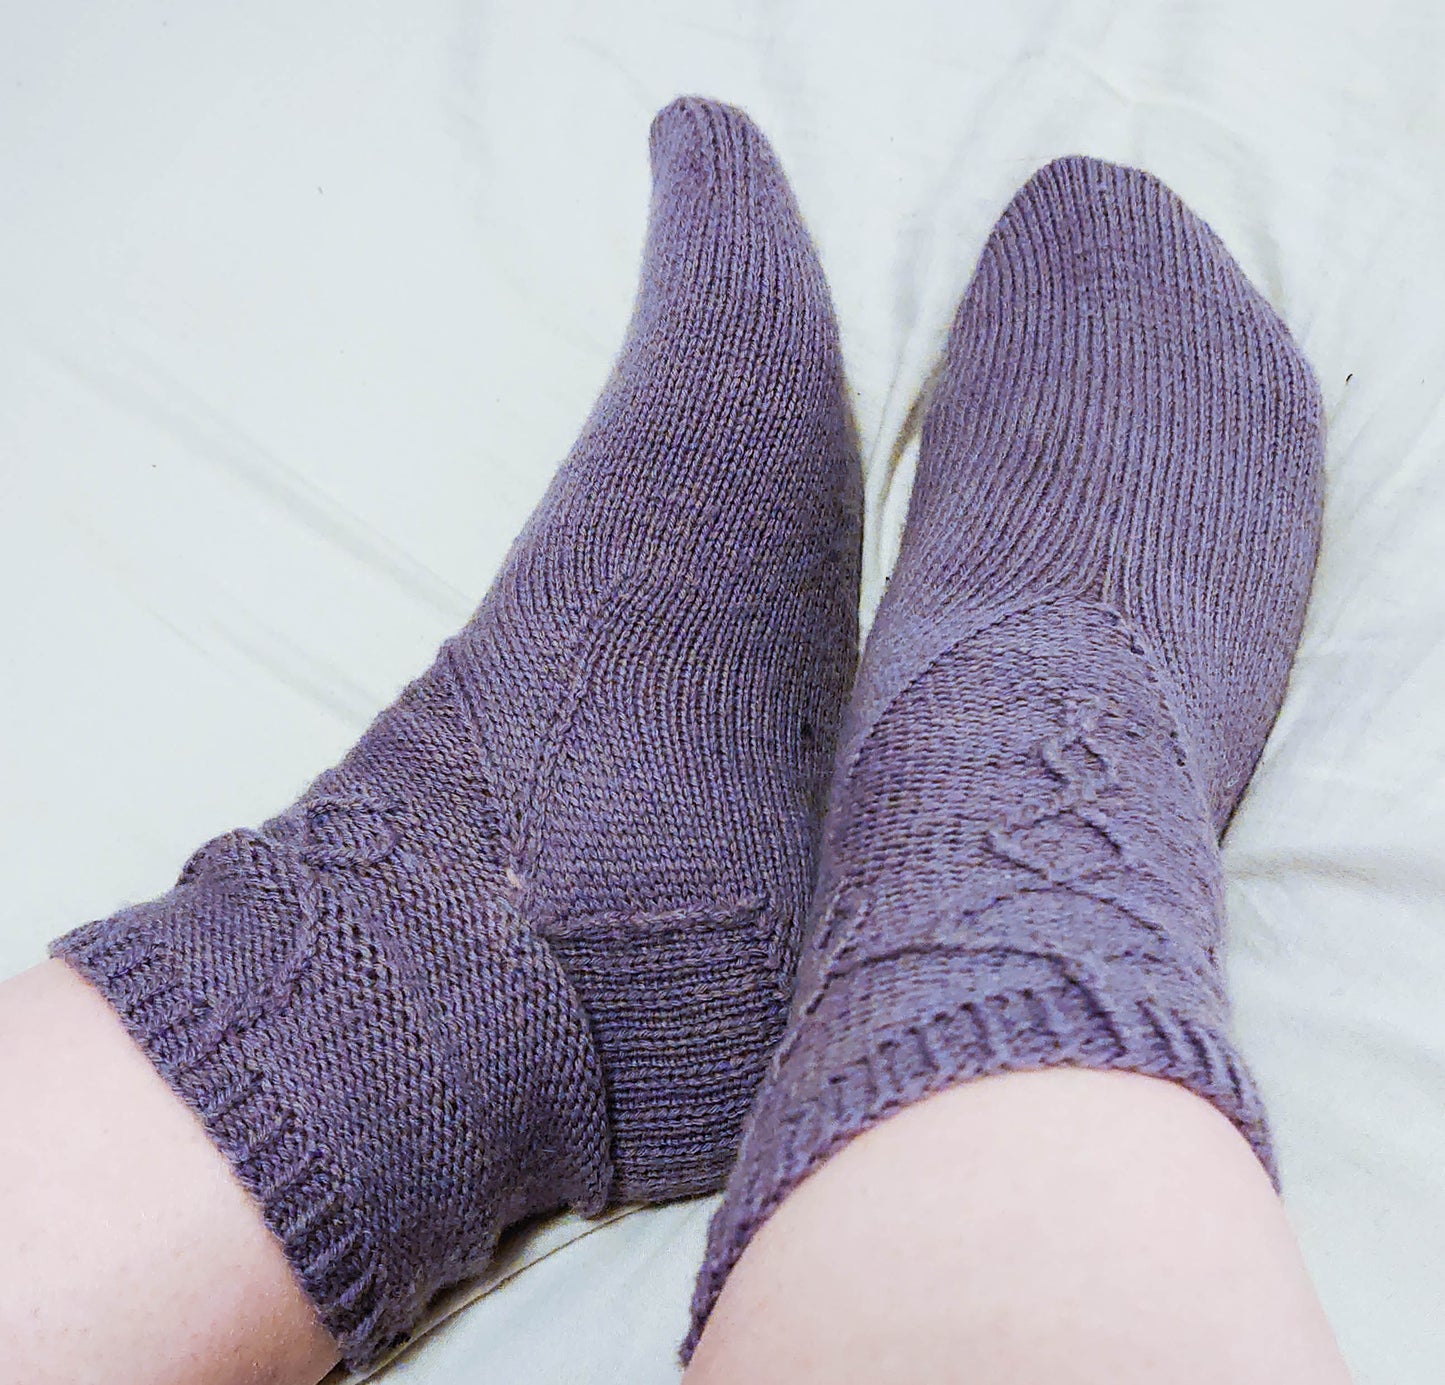 Lost in a Dream - Traveling Cables Sock Knitting Pattern